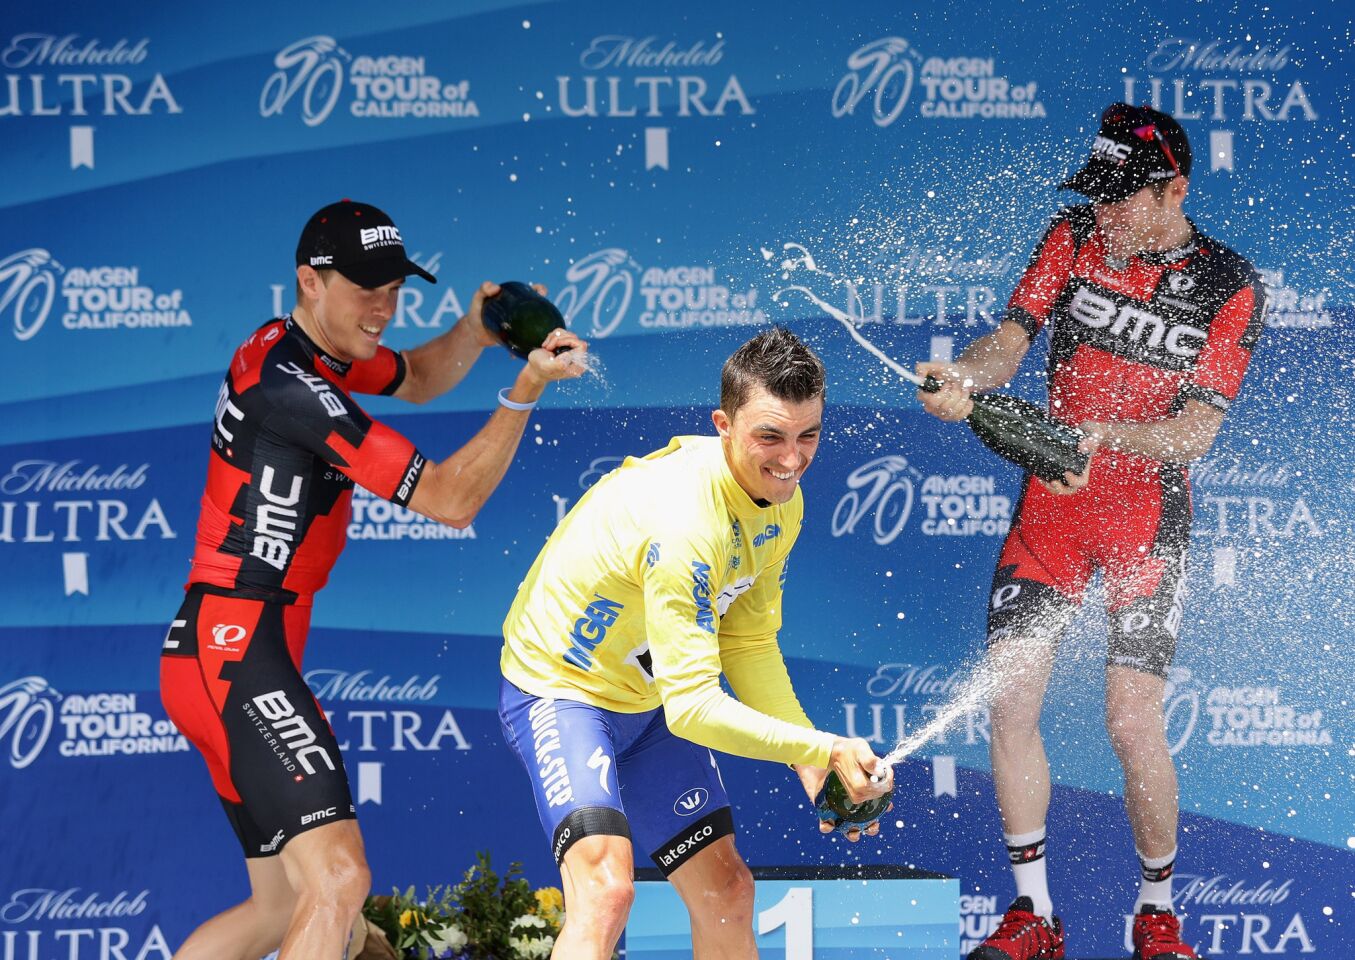 Amgen Tour of California winner Julian Alaphilippe (yellow jersey) celebrates on the podium with runner-up Rohan Dennis, left, and third-placer Brent Bookwalter on May 22 in Sacramento.